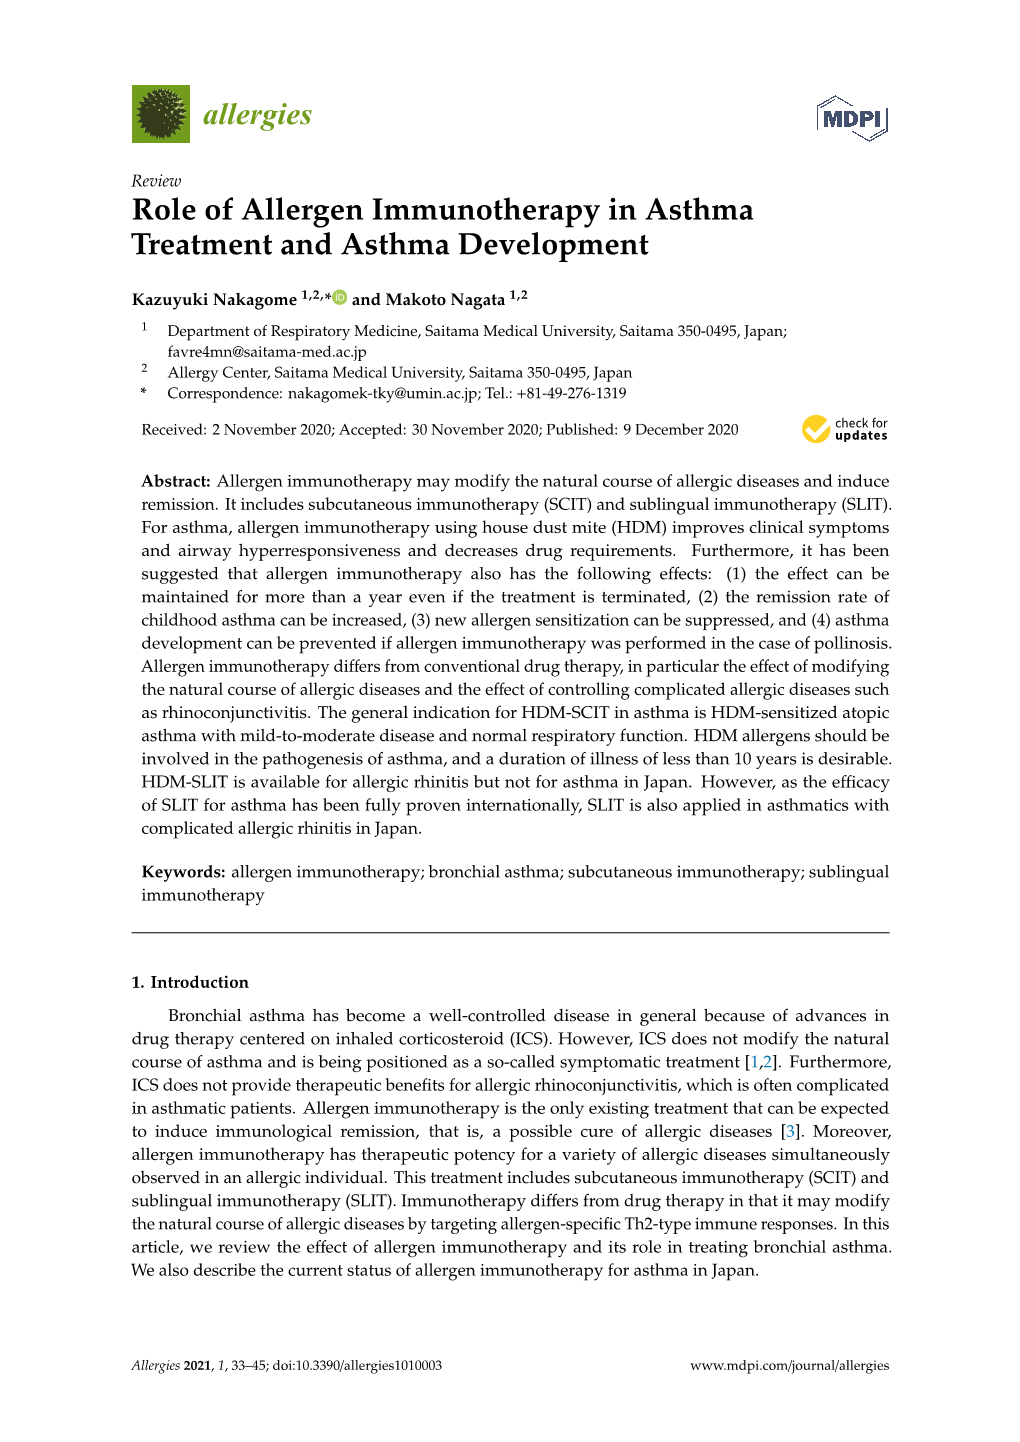 Role of Allergen Immunotherapy in Asthma Treatment and Asthma Development